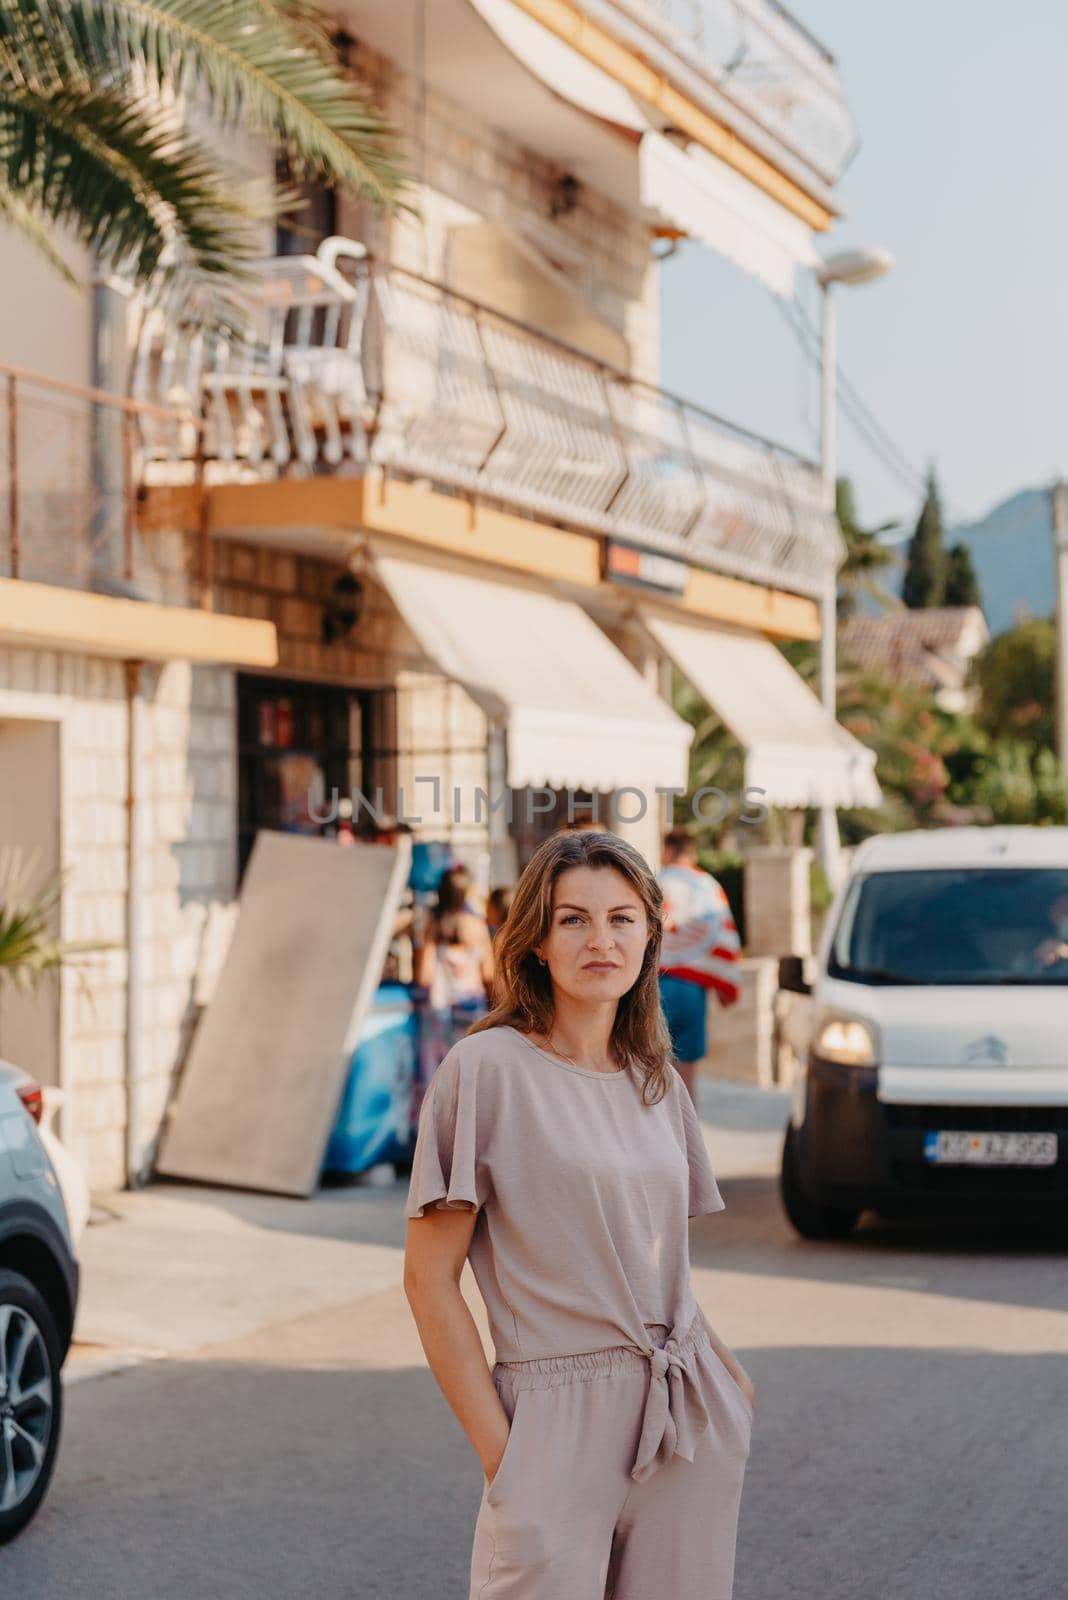 Girl Tourist Walking Through Ancient Narrow Street On A Beautiful Summer Day In MEDITERRANEAN MEDIEVAL CITY, MONTENEGRO. Young Beautiful Cheerful Woman Walking On Old Street At Tropical Town. Pretty Girl Looking At You And Smiling by Andrii_Ko